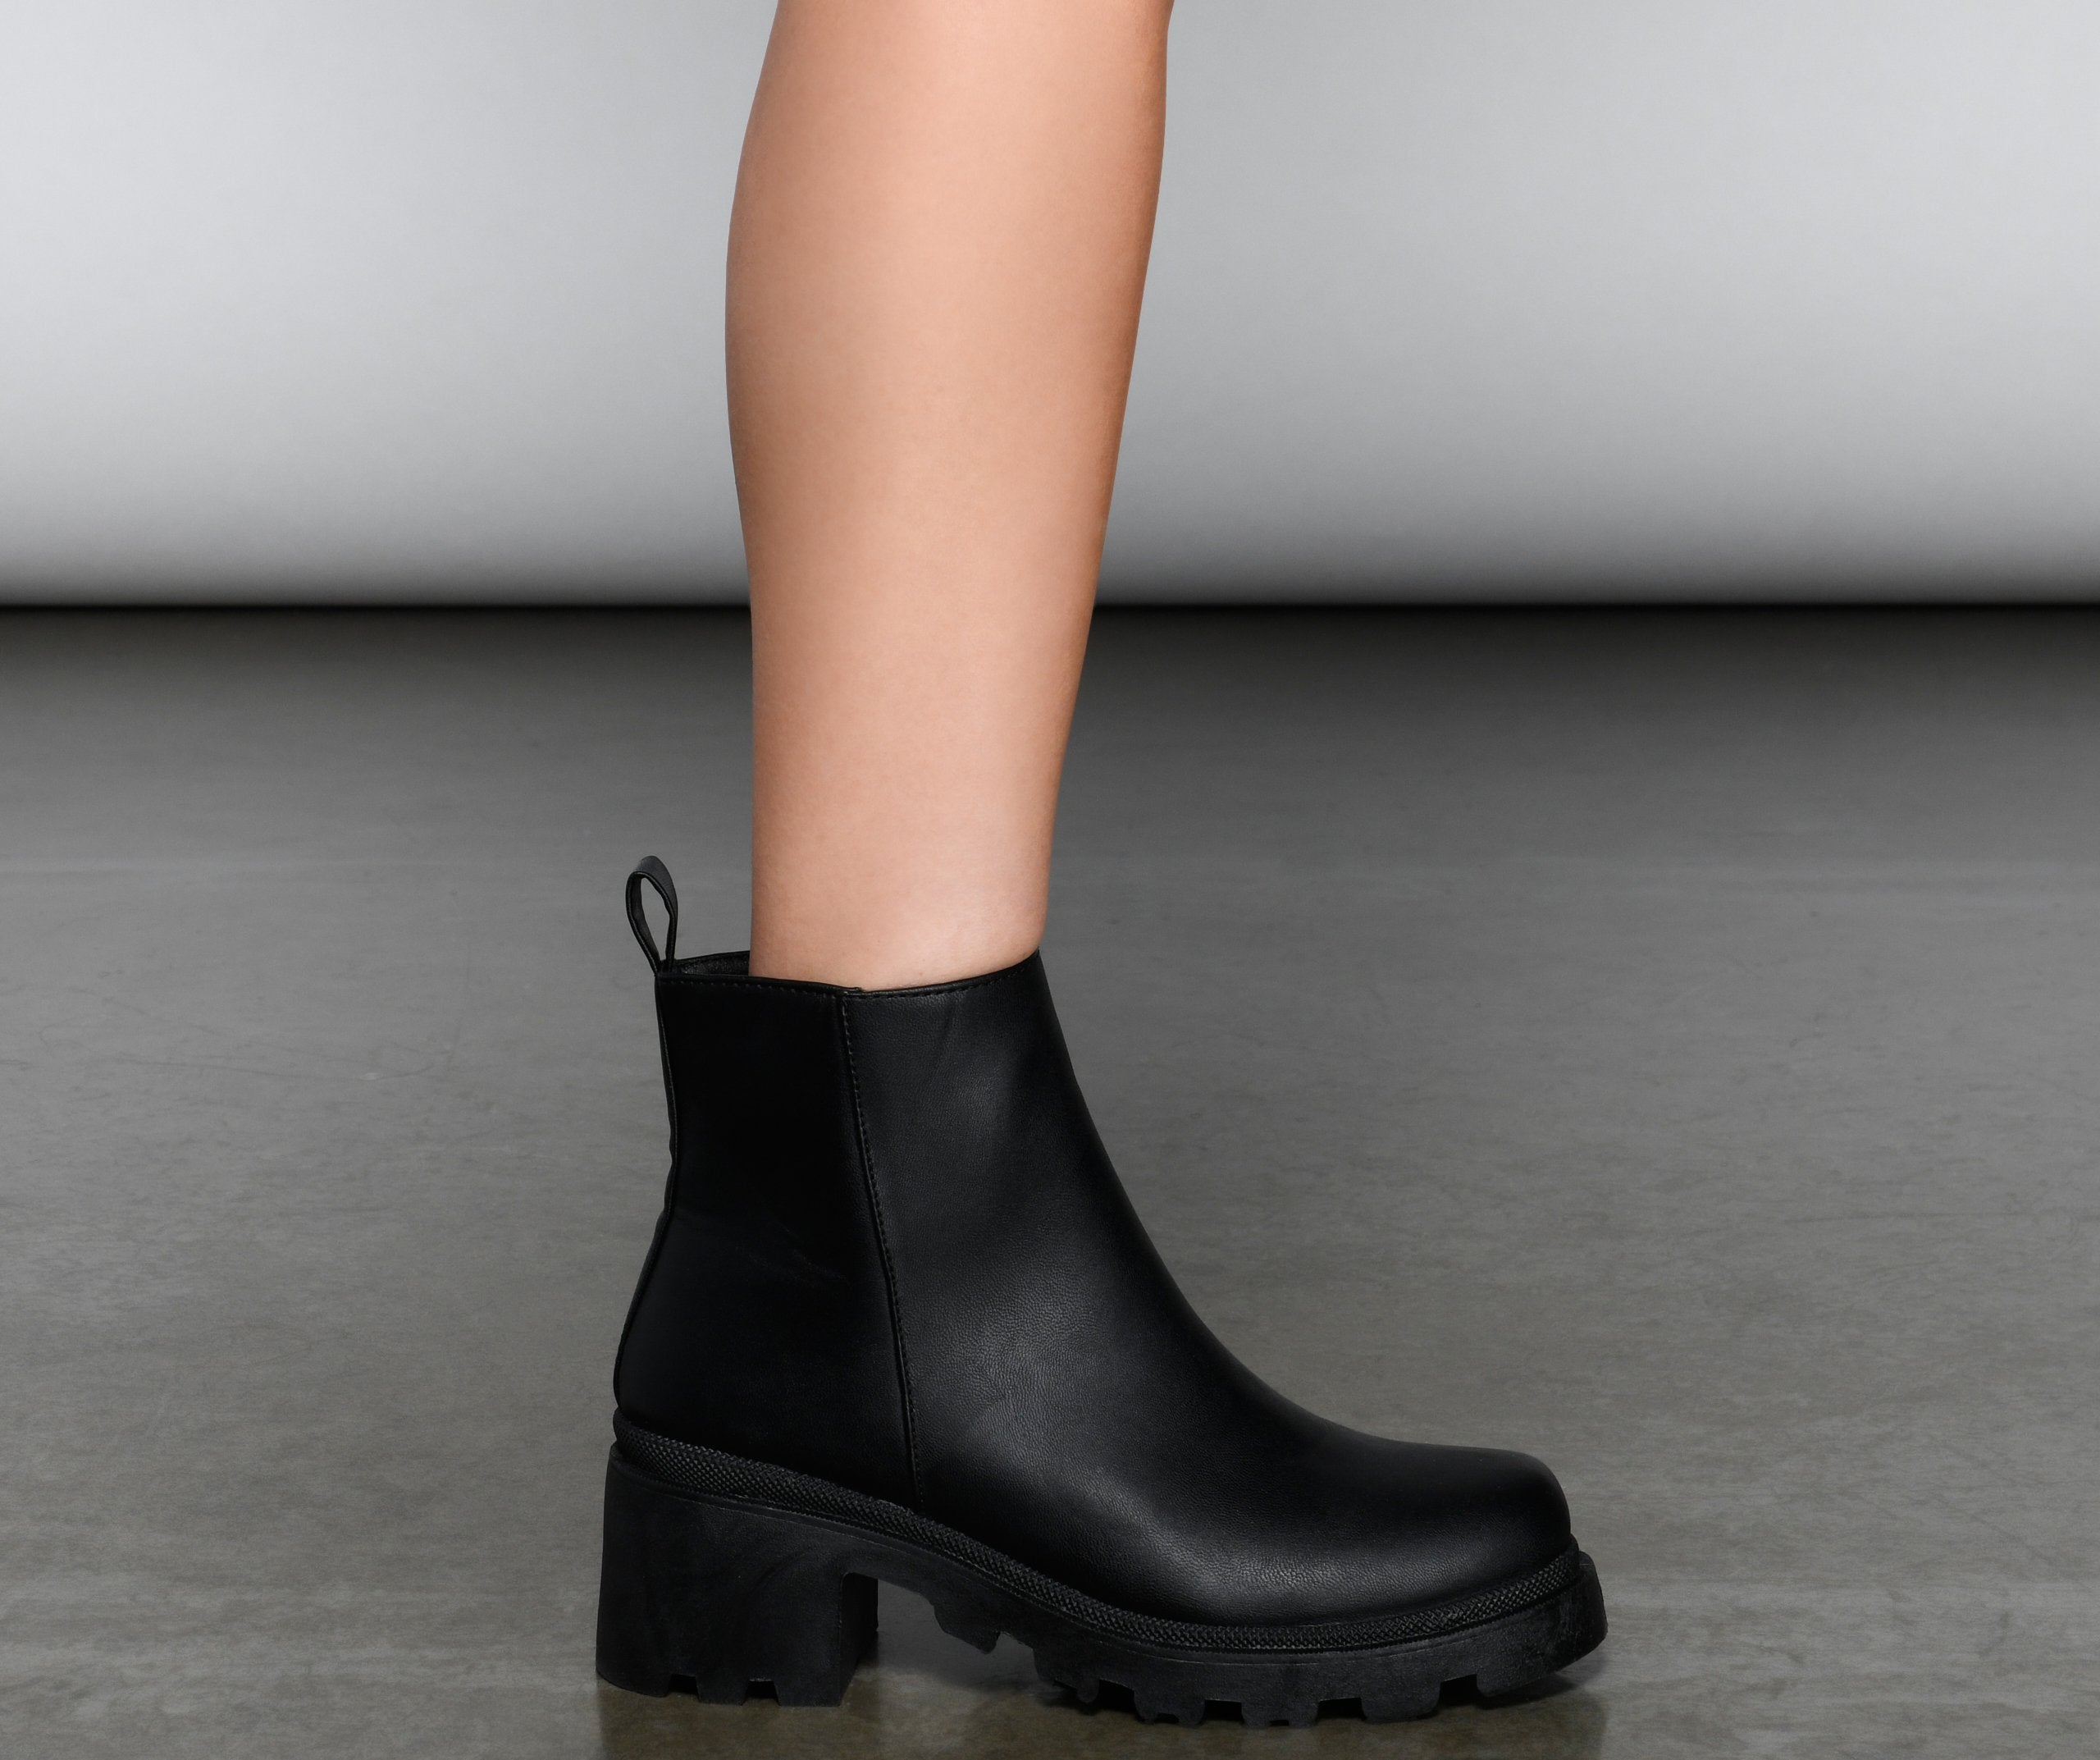 Edgy Glam Lug Sole Ankle Booties - Lady Occasions